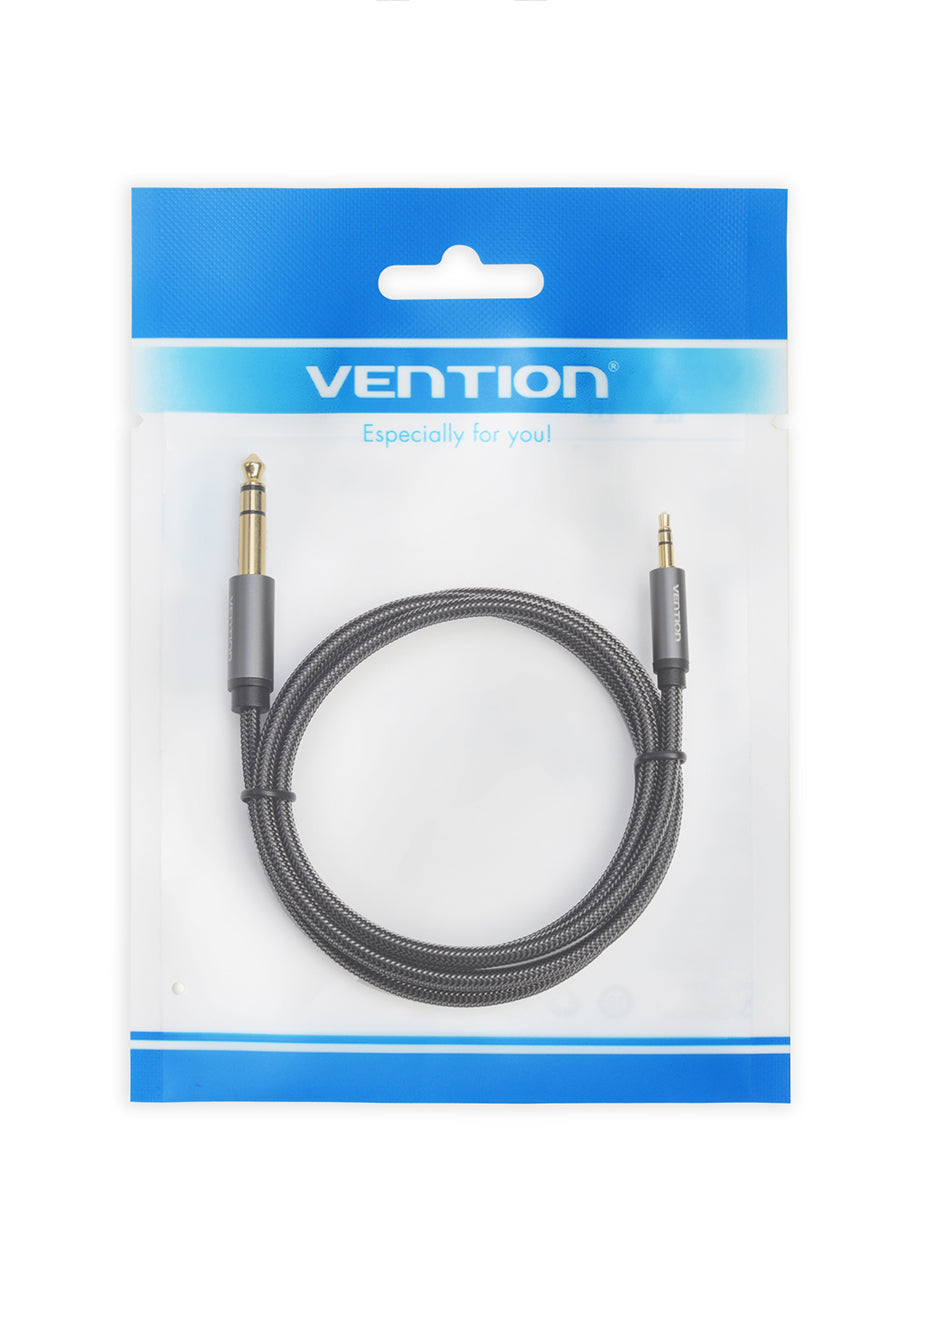 Vention 3.5mm Male to 6.5mm Male Nylon Braided Gold Plated (BAI) Audio Cable for Microphones, Amplifiers, Sound Box, Laptops and Mobile Phones (Available in Different Lengths)